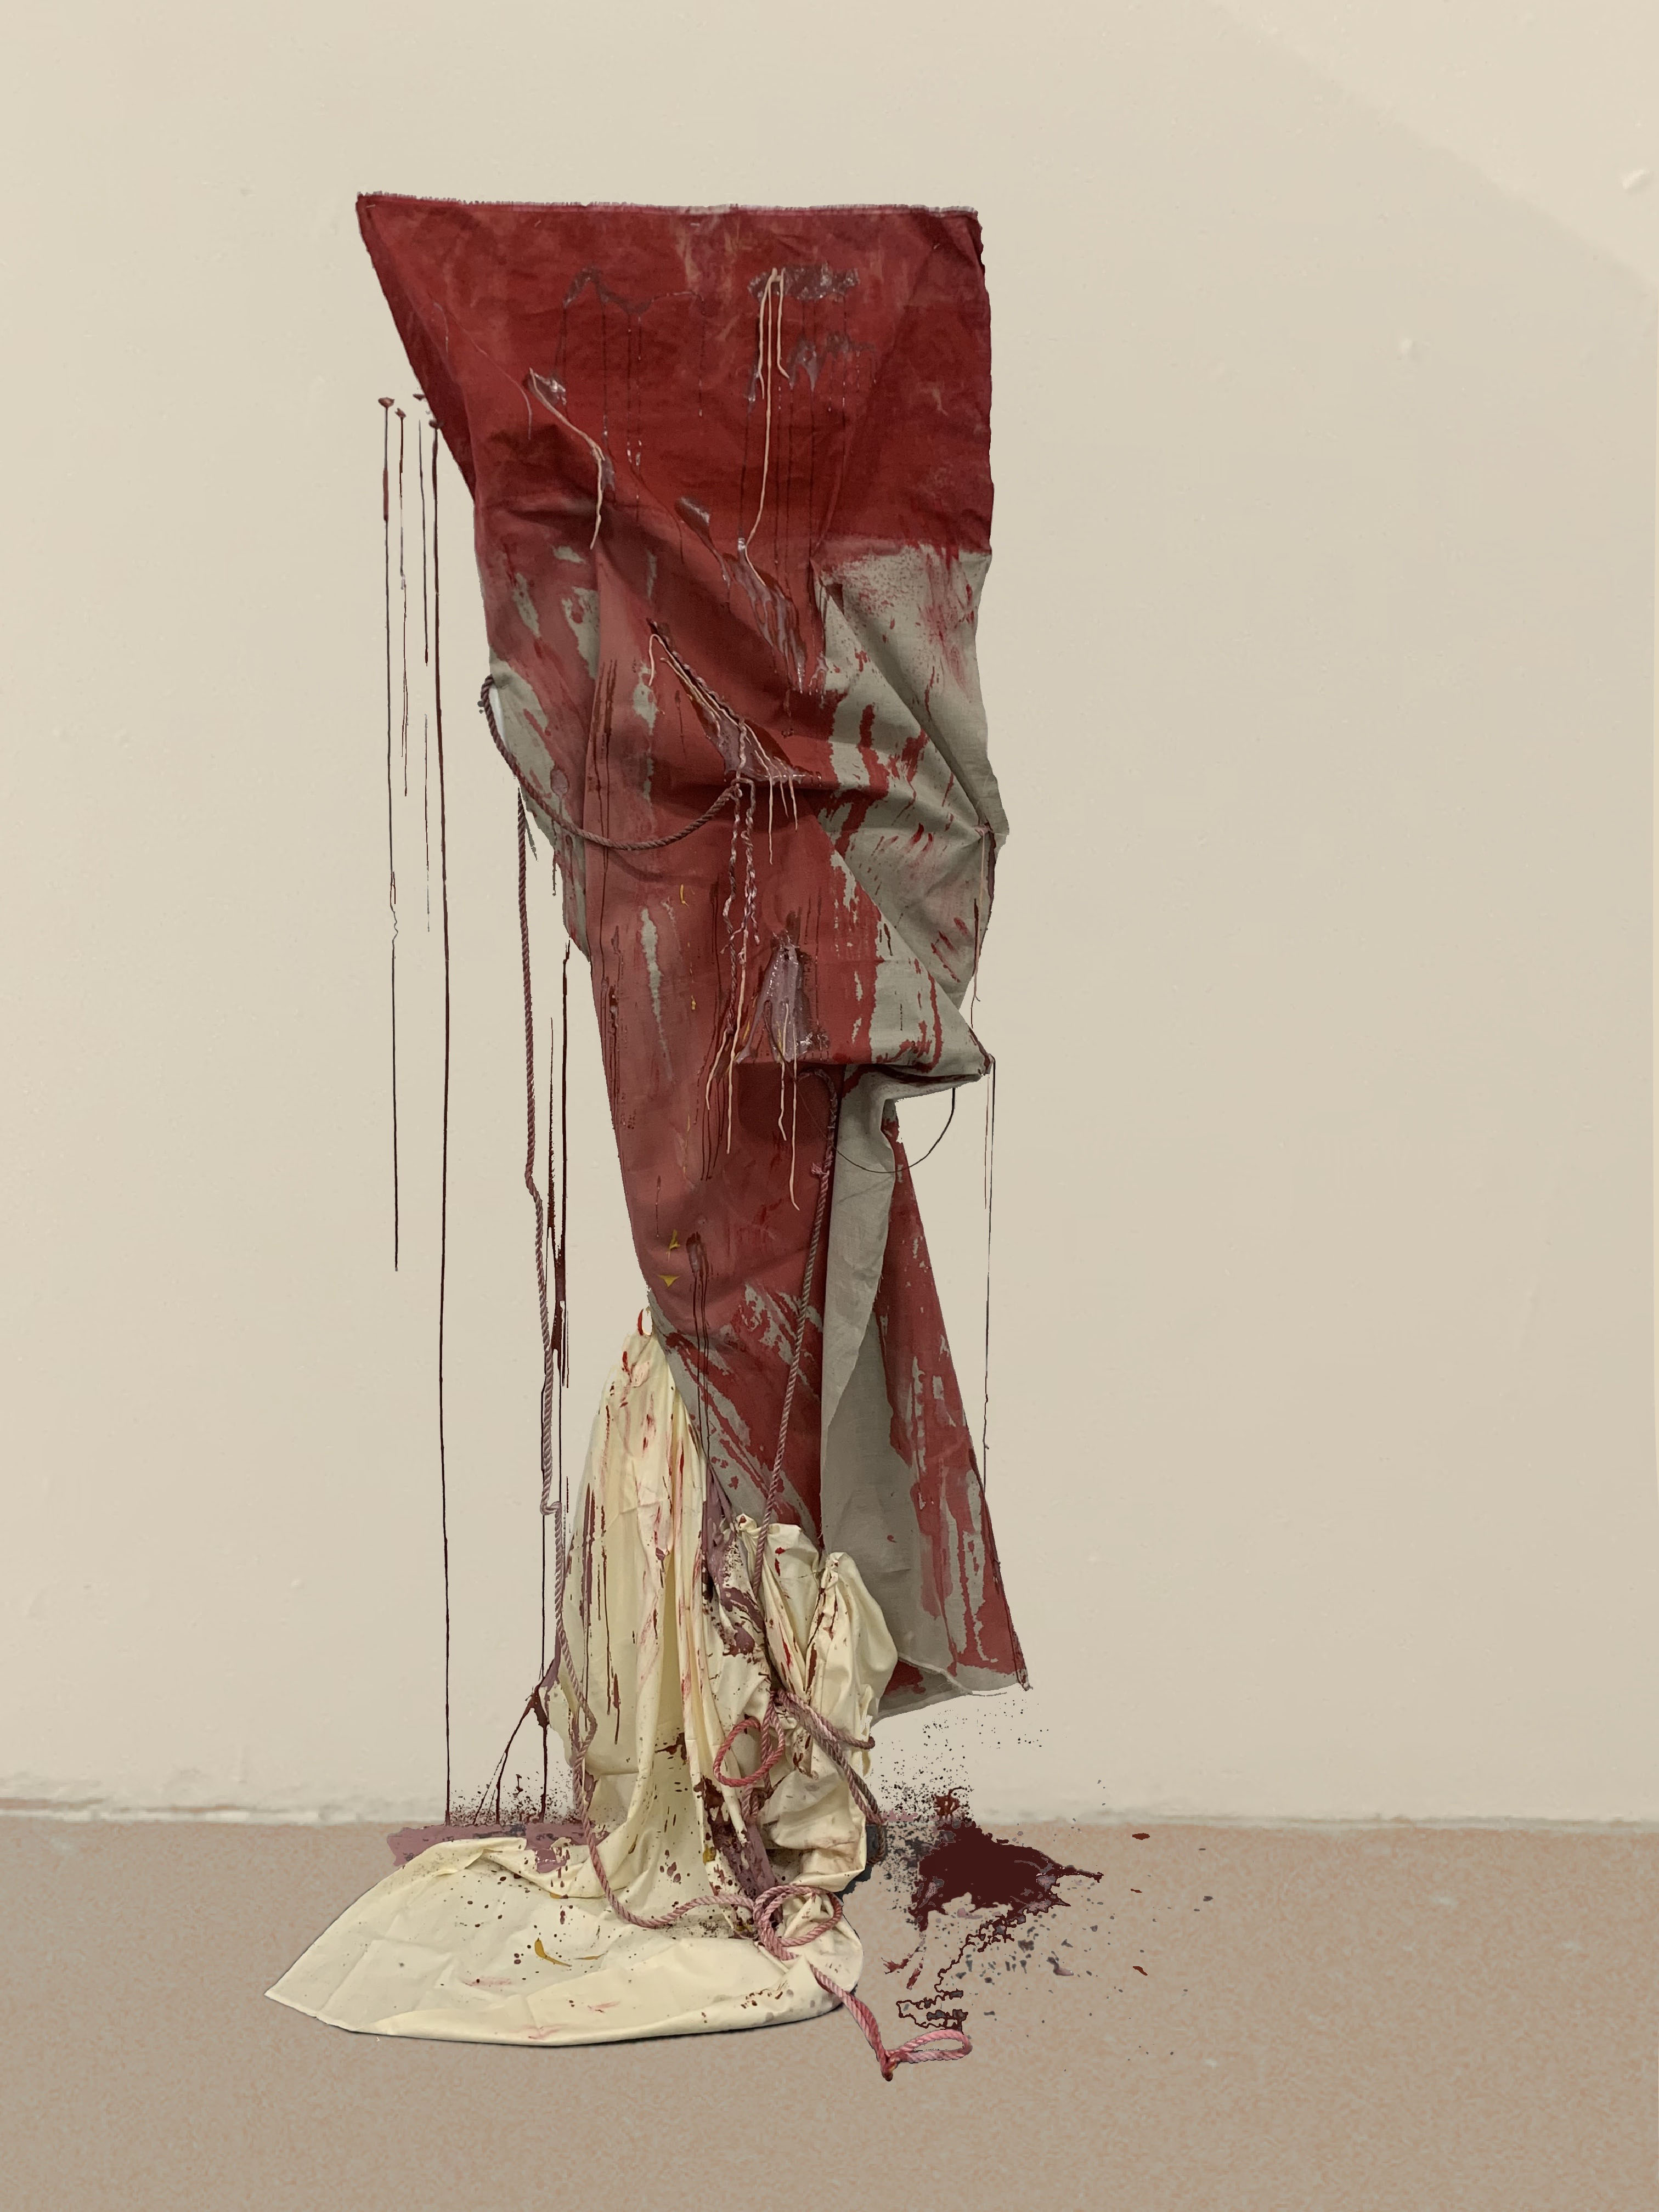 Image of collaborative abstract painting folded and dripped with red paint. With hanging bits of rope, latex and clay.